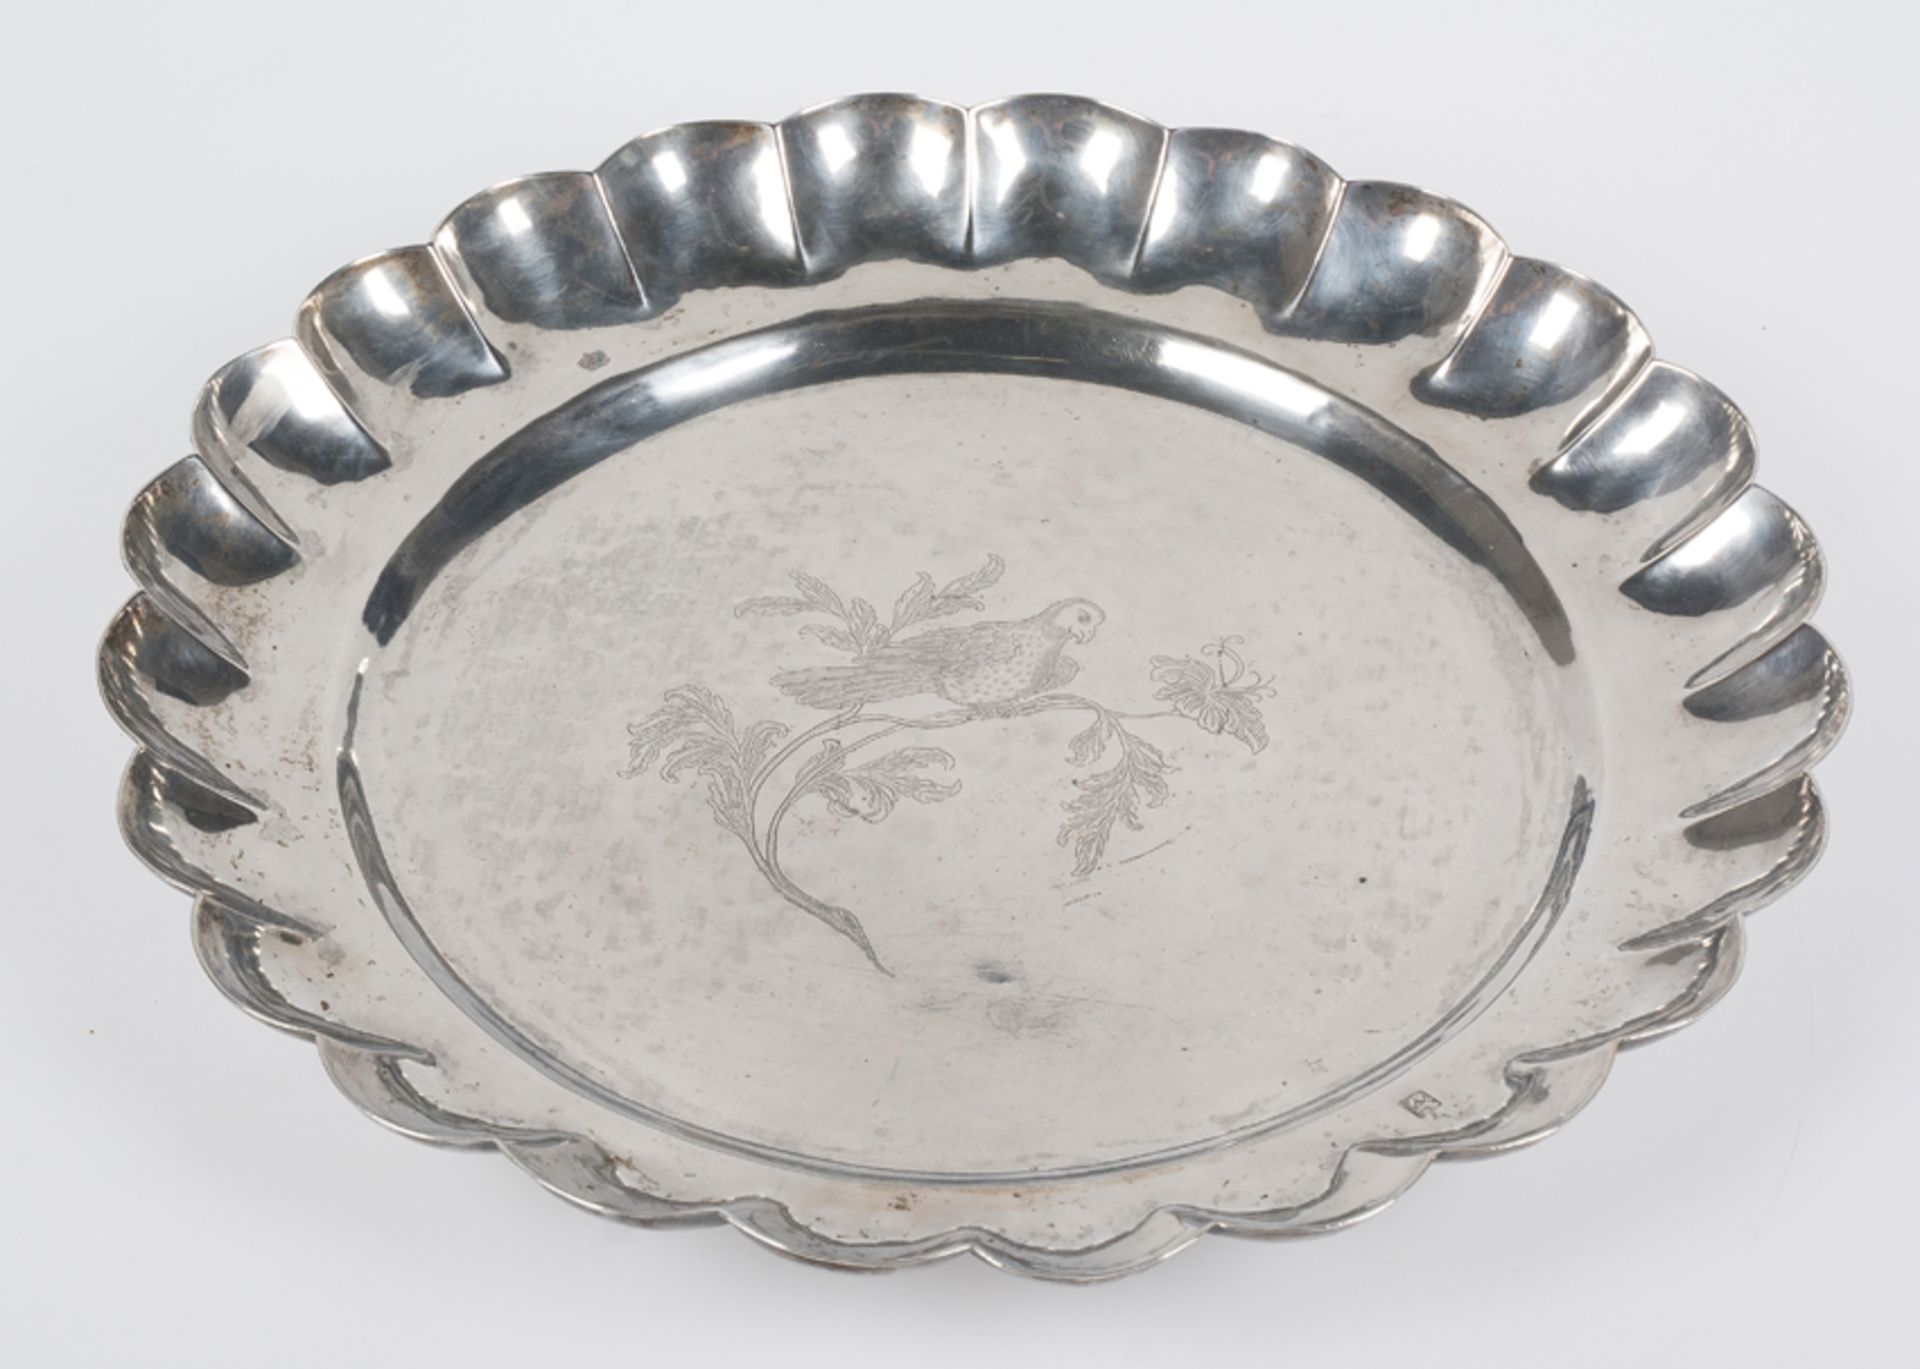 Large silver plate. Colonial work. Possibly Guatemala or Leon, Nicaragua. 18th century. - Image 2 of 6